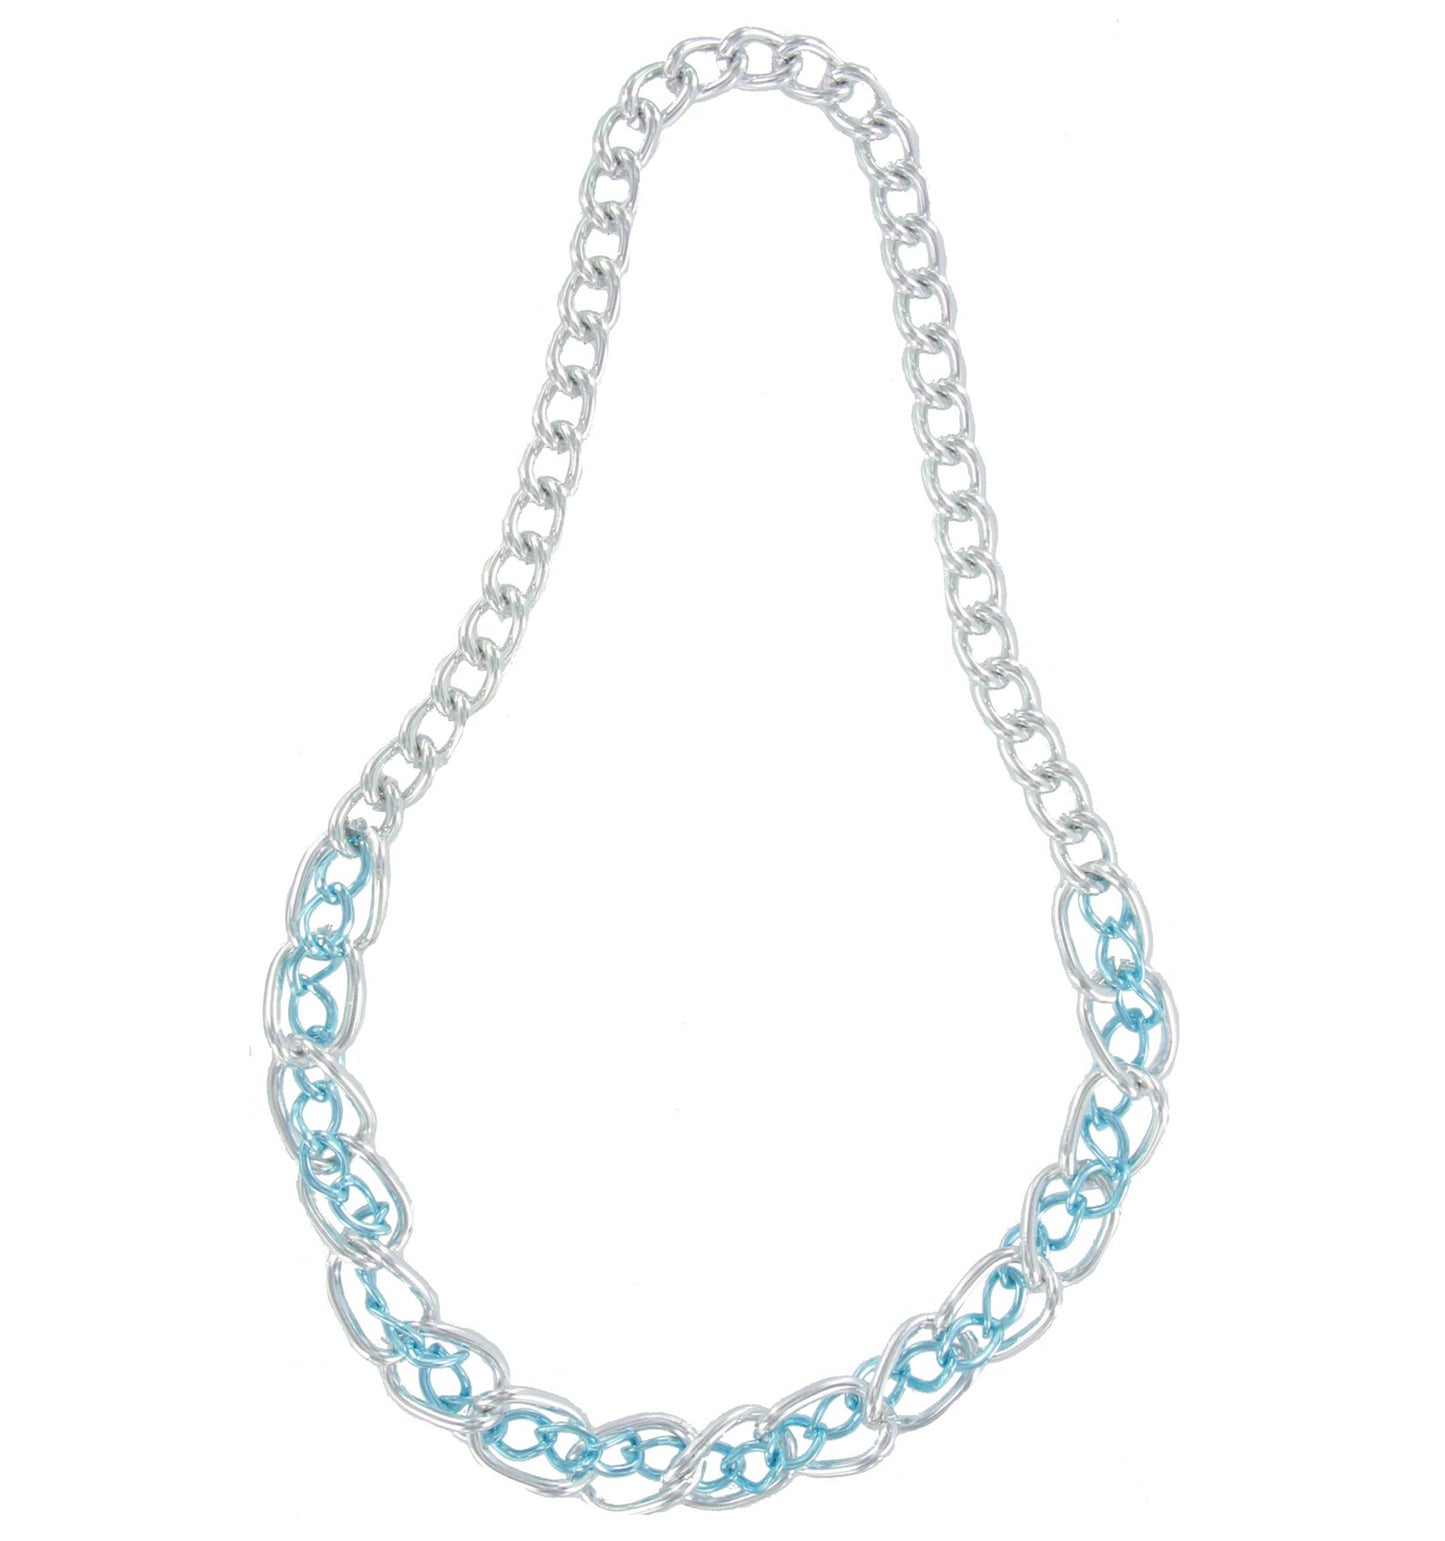 Necklace Chain Blue Big Chunky Silver Tone Link 23"